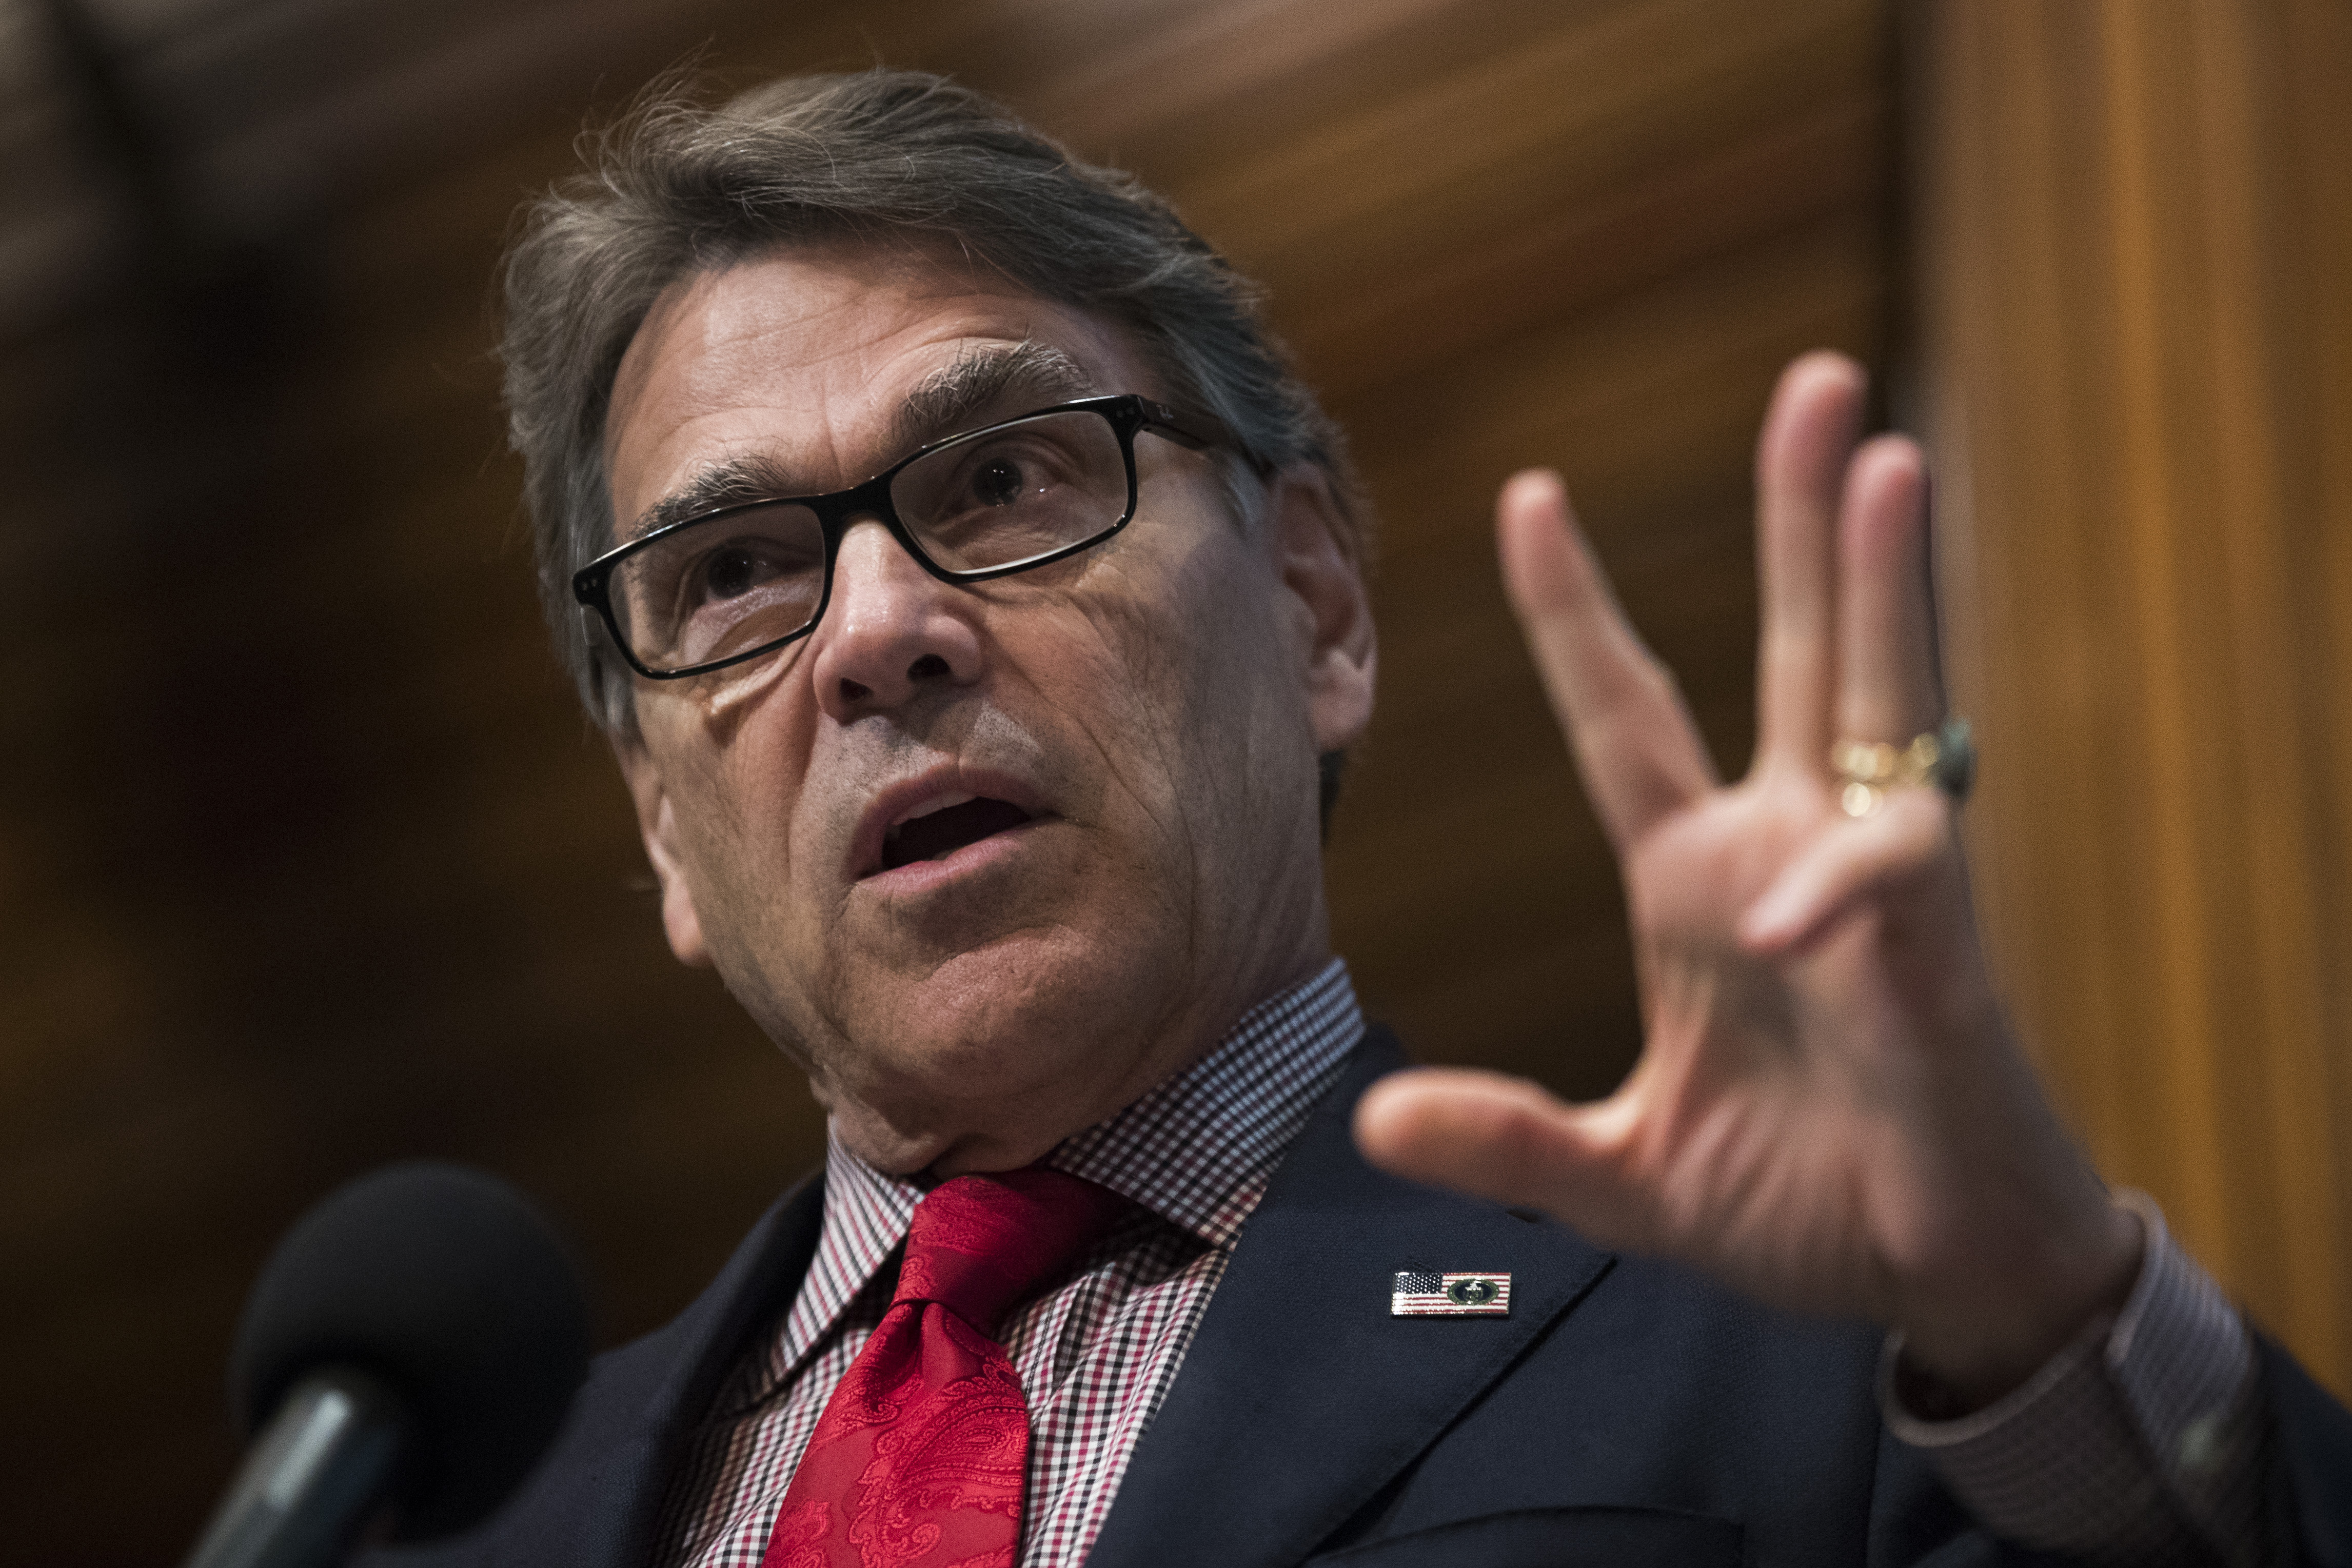 U.S. Secretary of Energy Rick Perry, pictured at the National Press Club, Oct. 16, 2017 in Washington, DC, said Thursday that fossil fuels can help prevent sexual assault. (Drew Angerer—Getty Images)